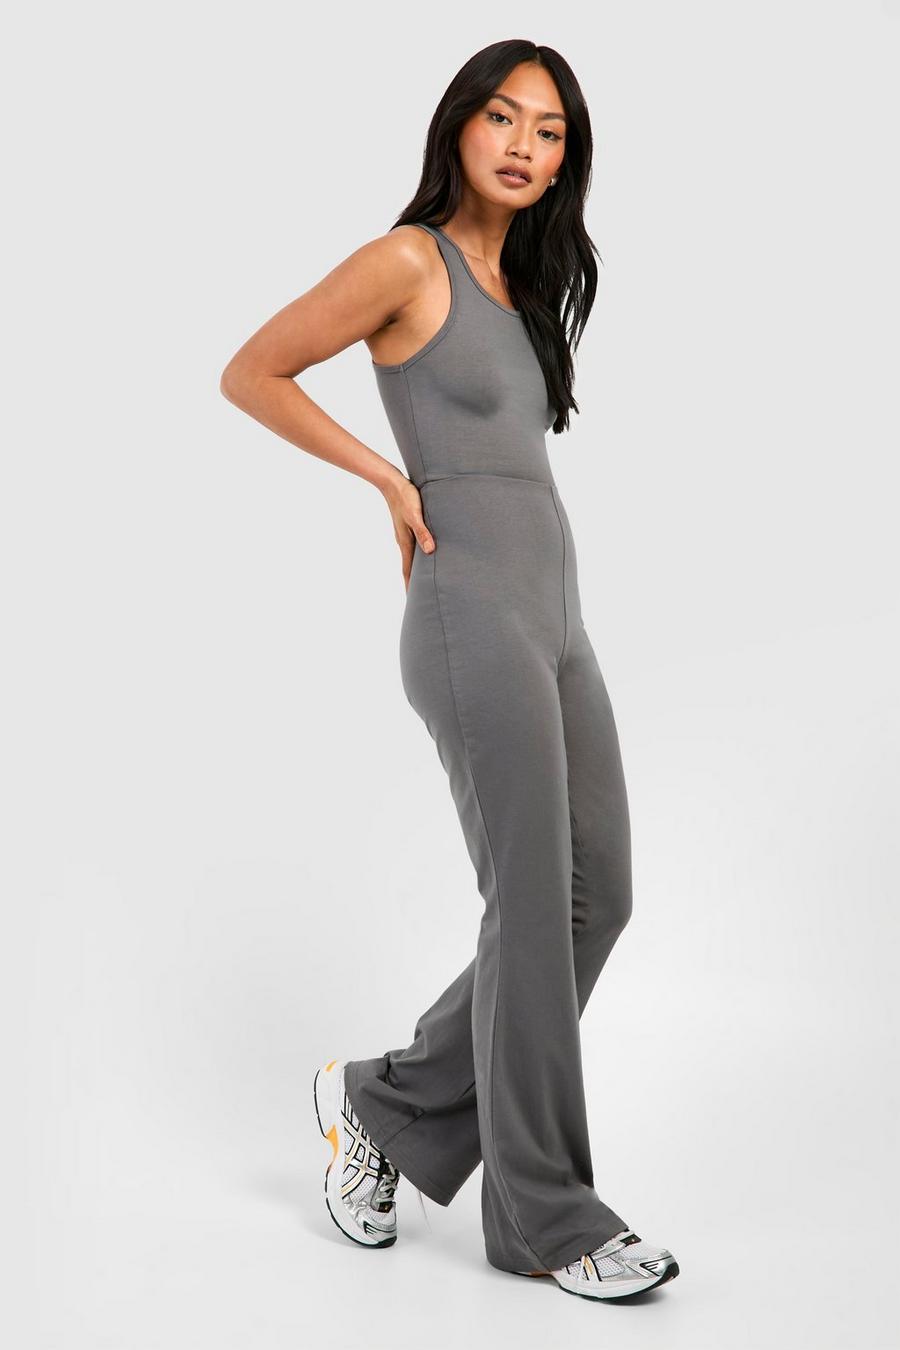 Charcoal Strappy Cotton Yoga Unitard Jumpsuit image number 1